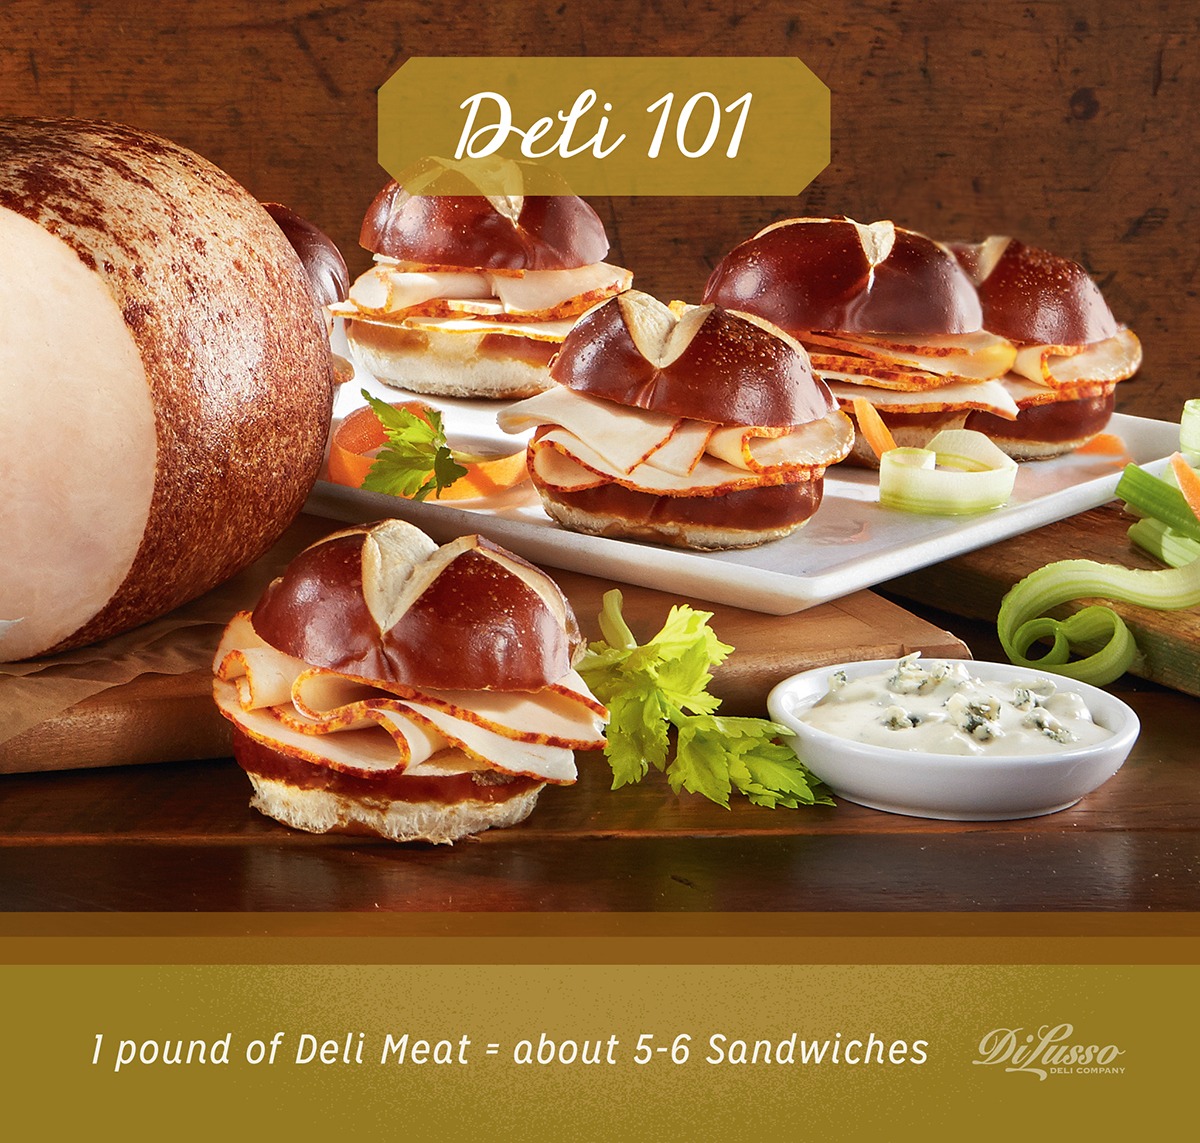 Deli 101: How Much Meat?